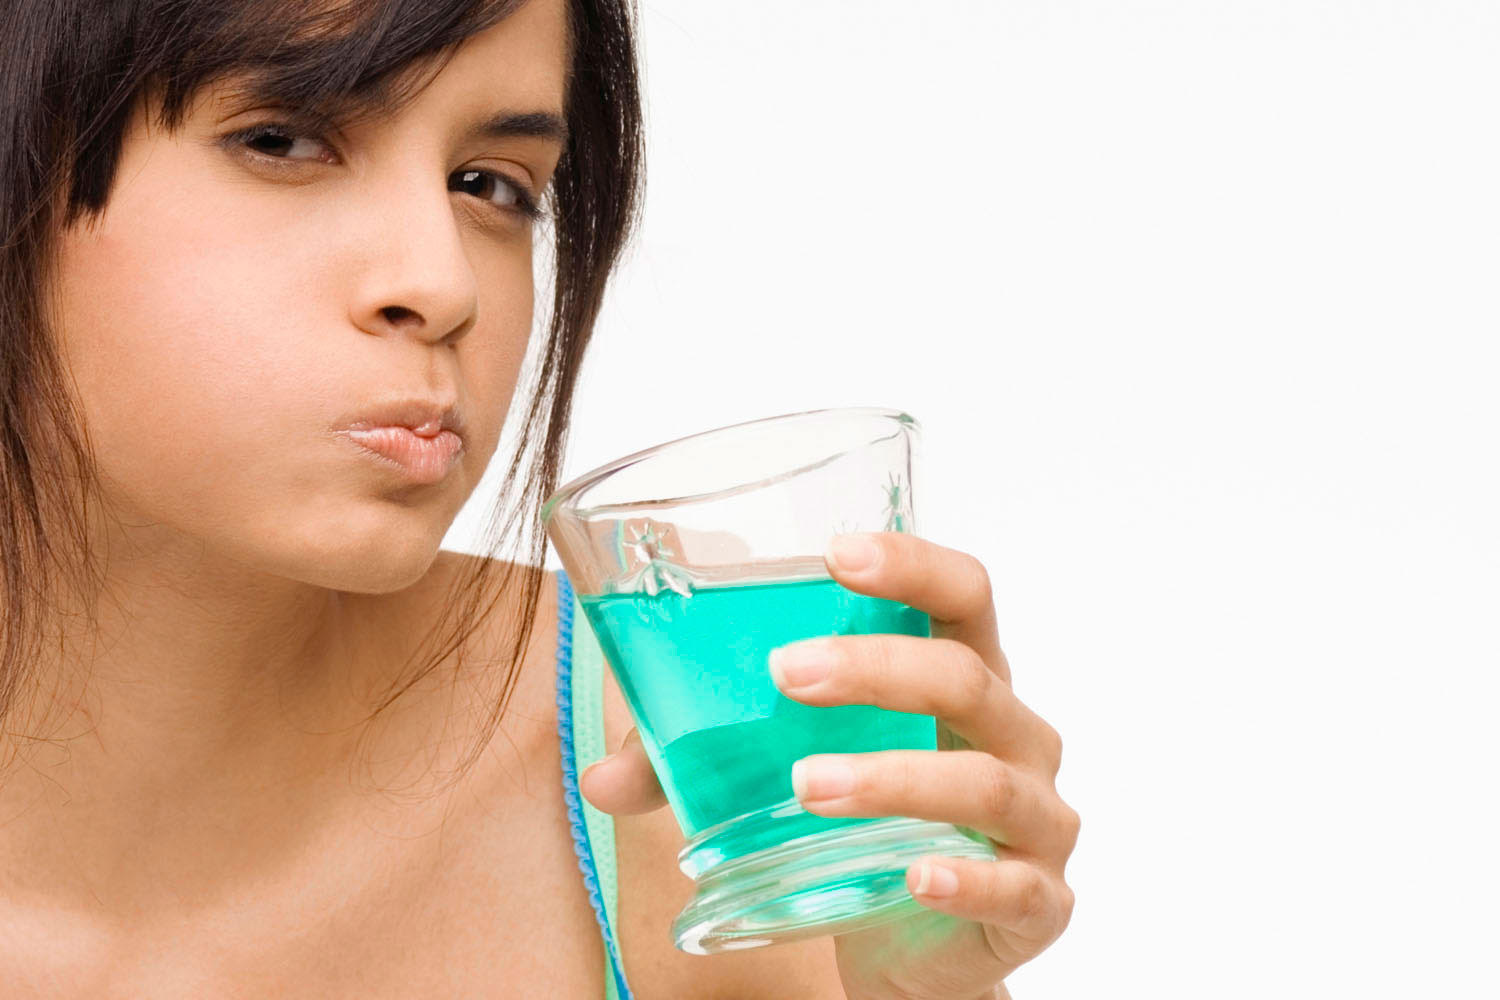 Tips About Mouthwash For Oral Hygiene